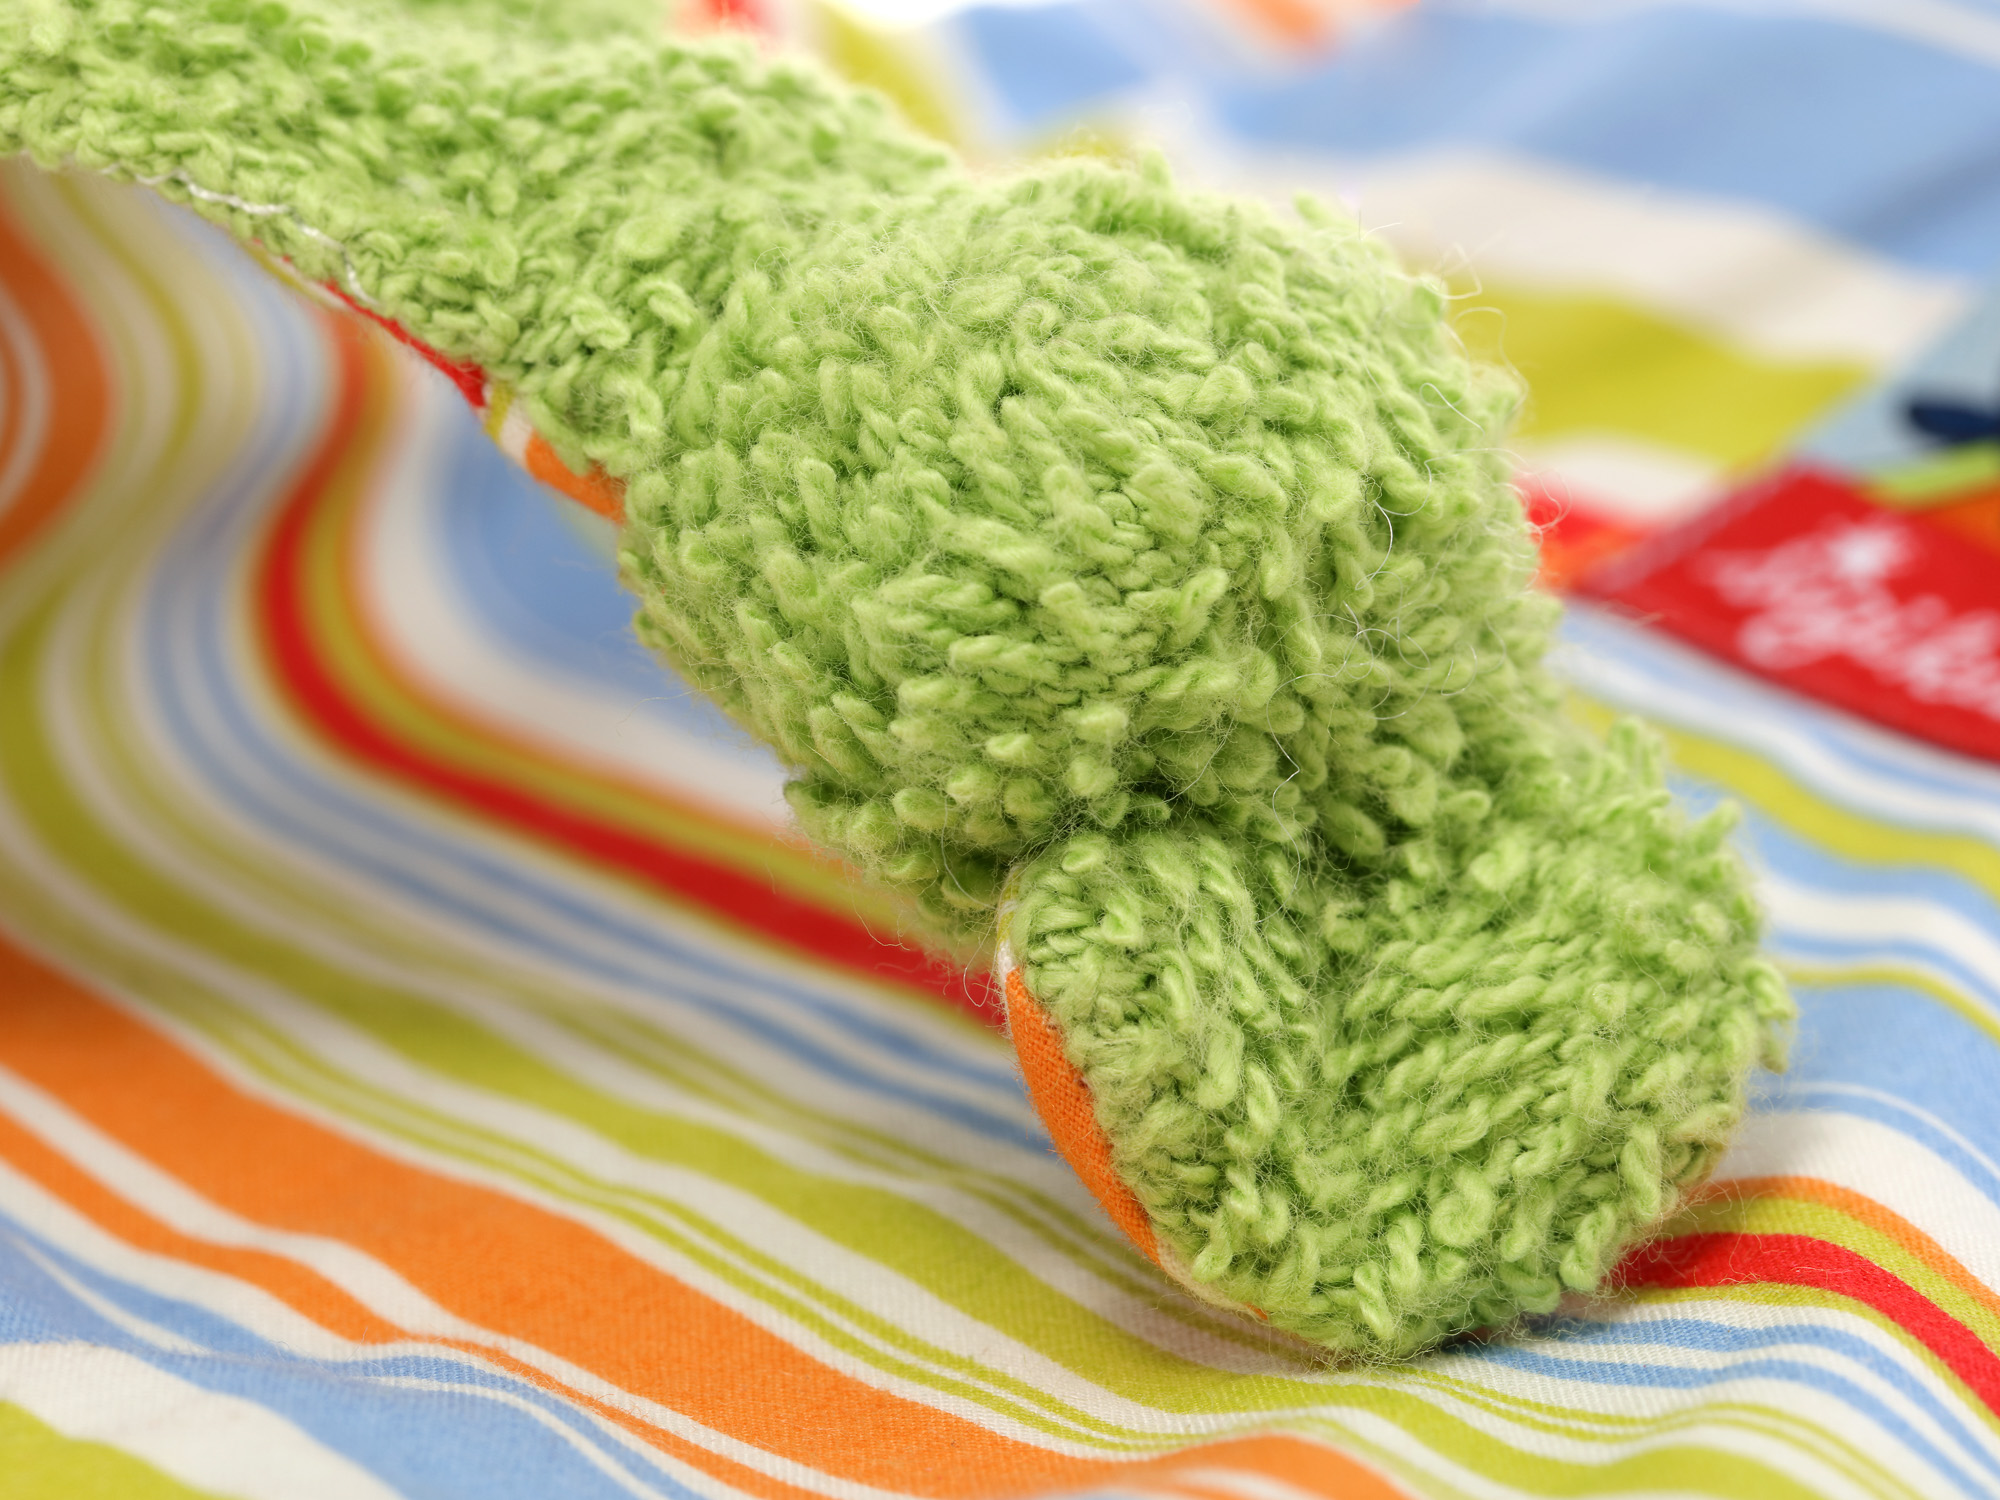 Colourful baby blankie "Fortis Frog"